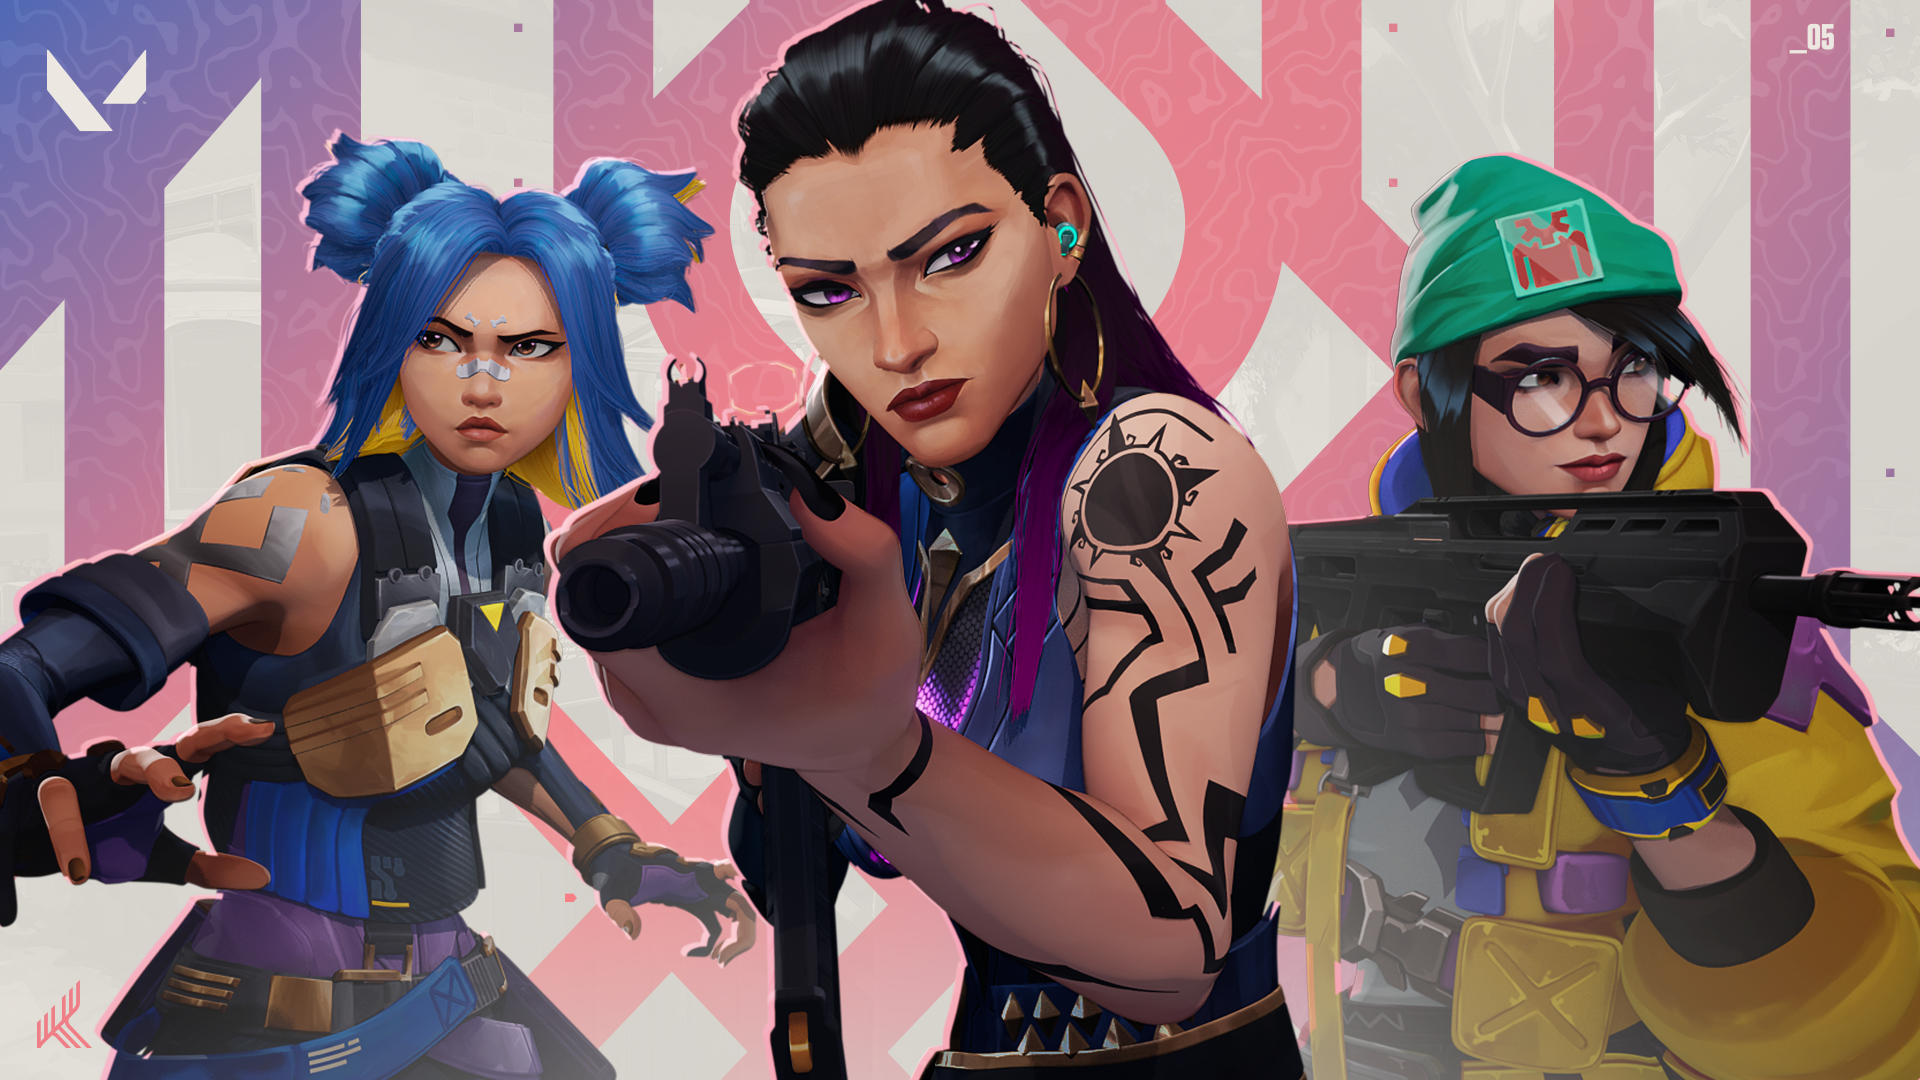 From left to right, VALORANT agents Neon, Reyna, and Killjoy can be seen.